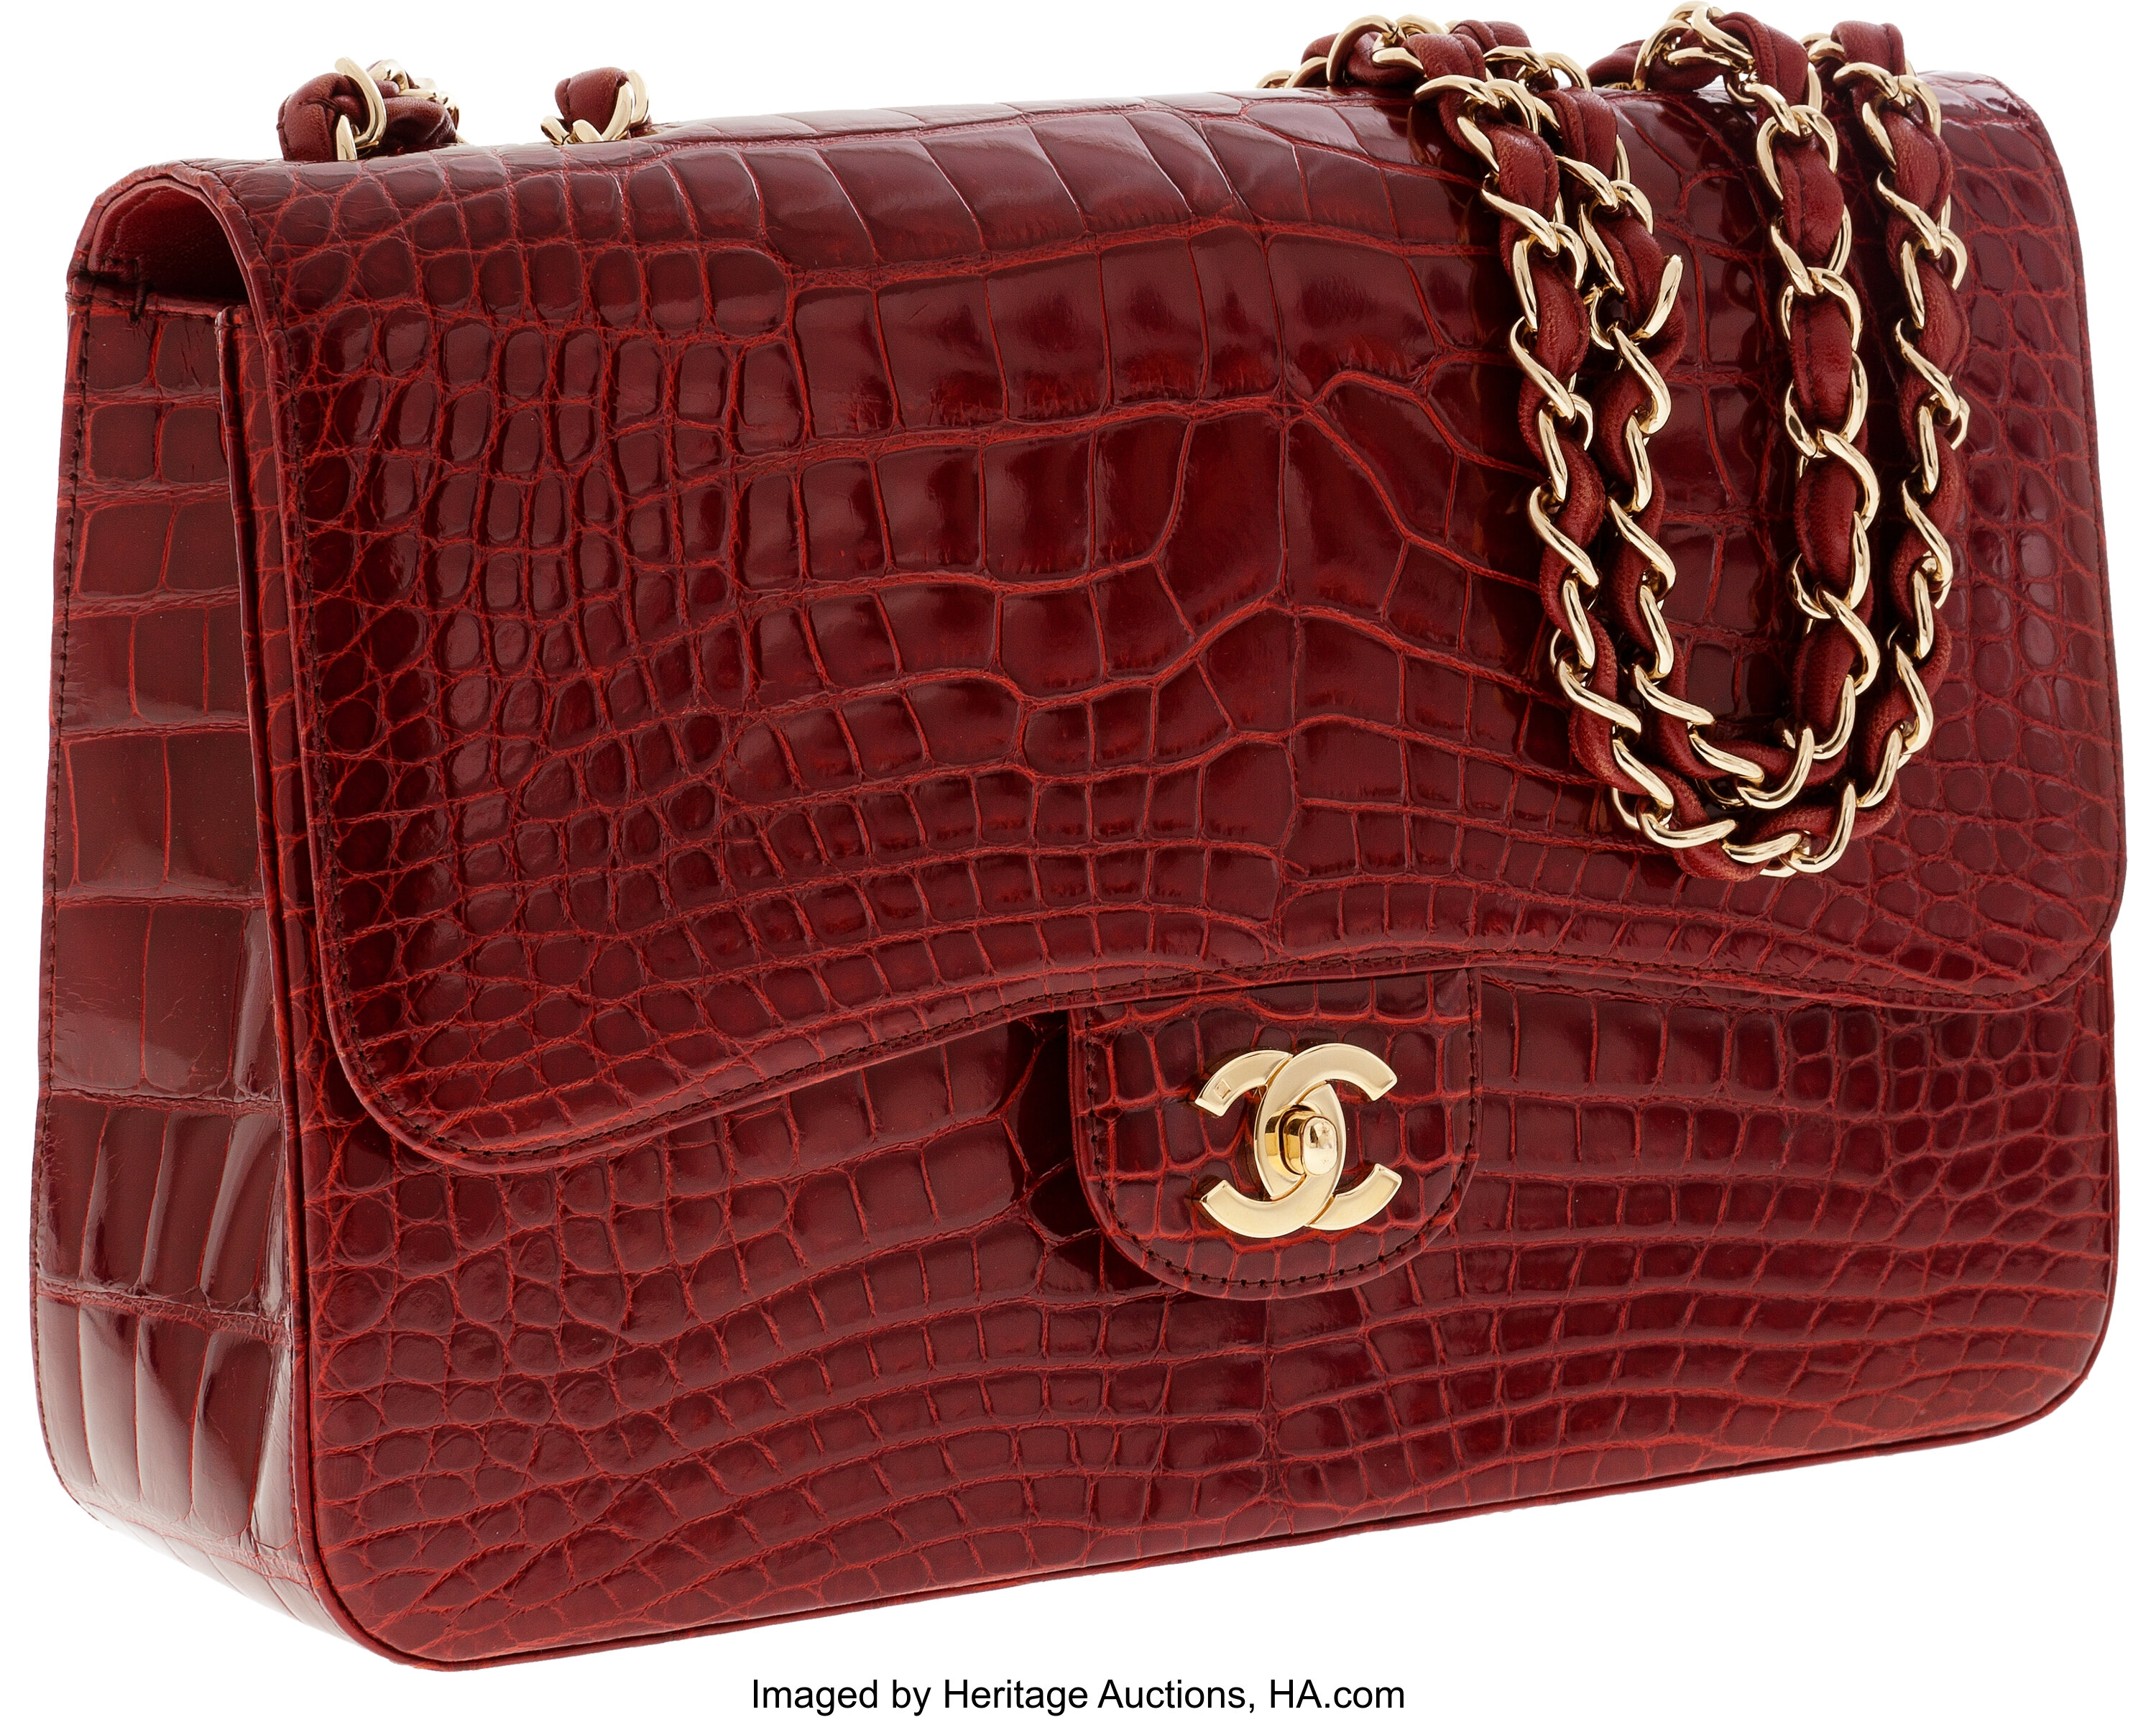 Chanel Shiny Red Crocodile Jumbo Single Flap Bag with Gold | Lot #56258 |  Heritage Auctions